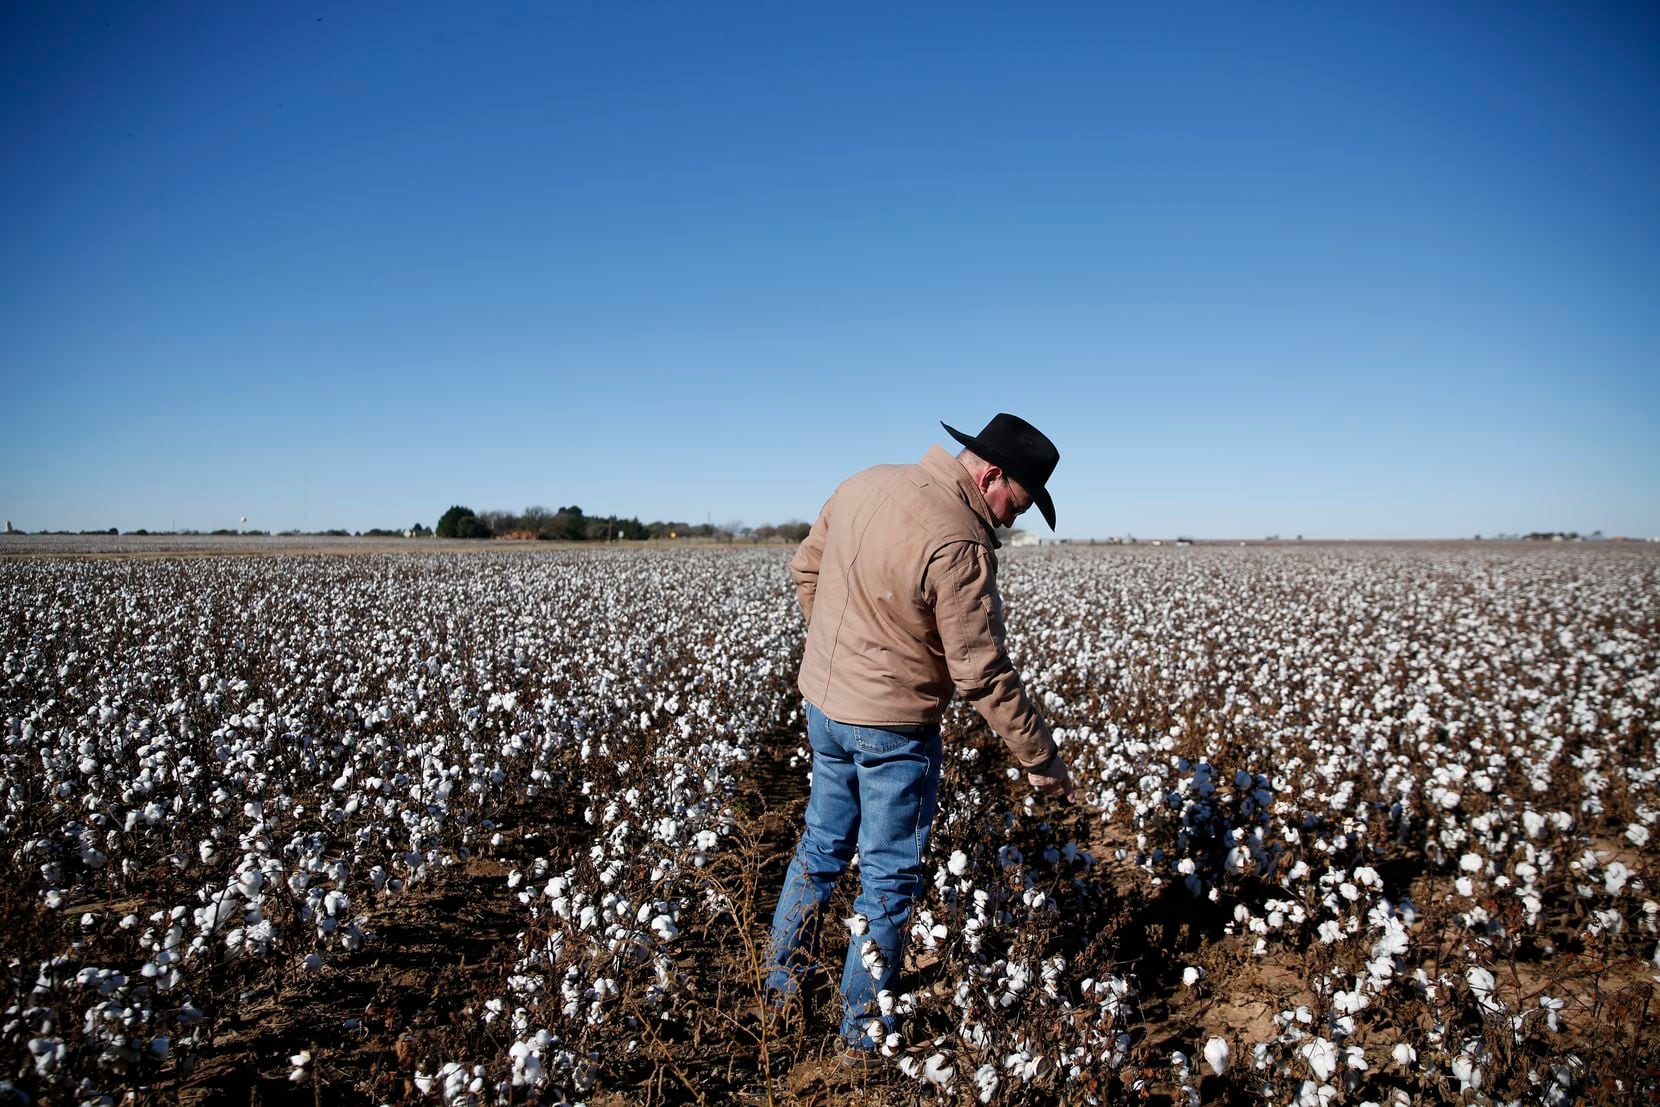 Cotton is a joy to farm. In some ways it's even easier than grain